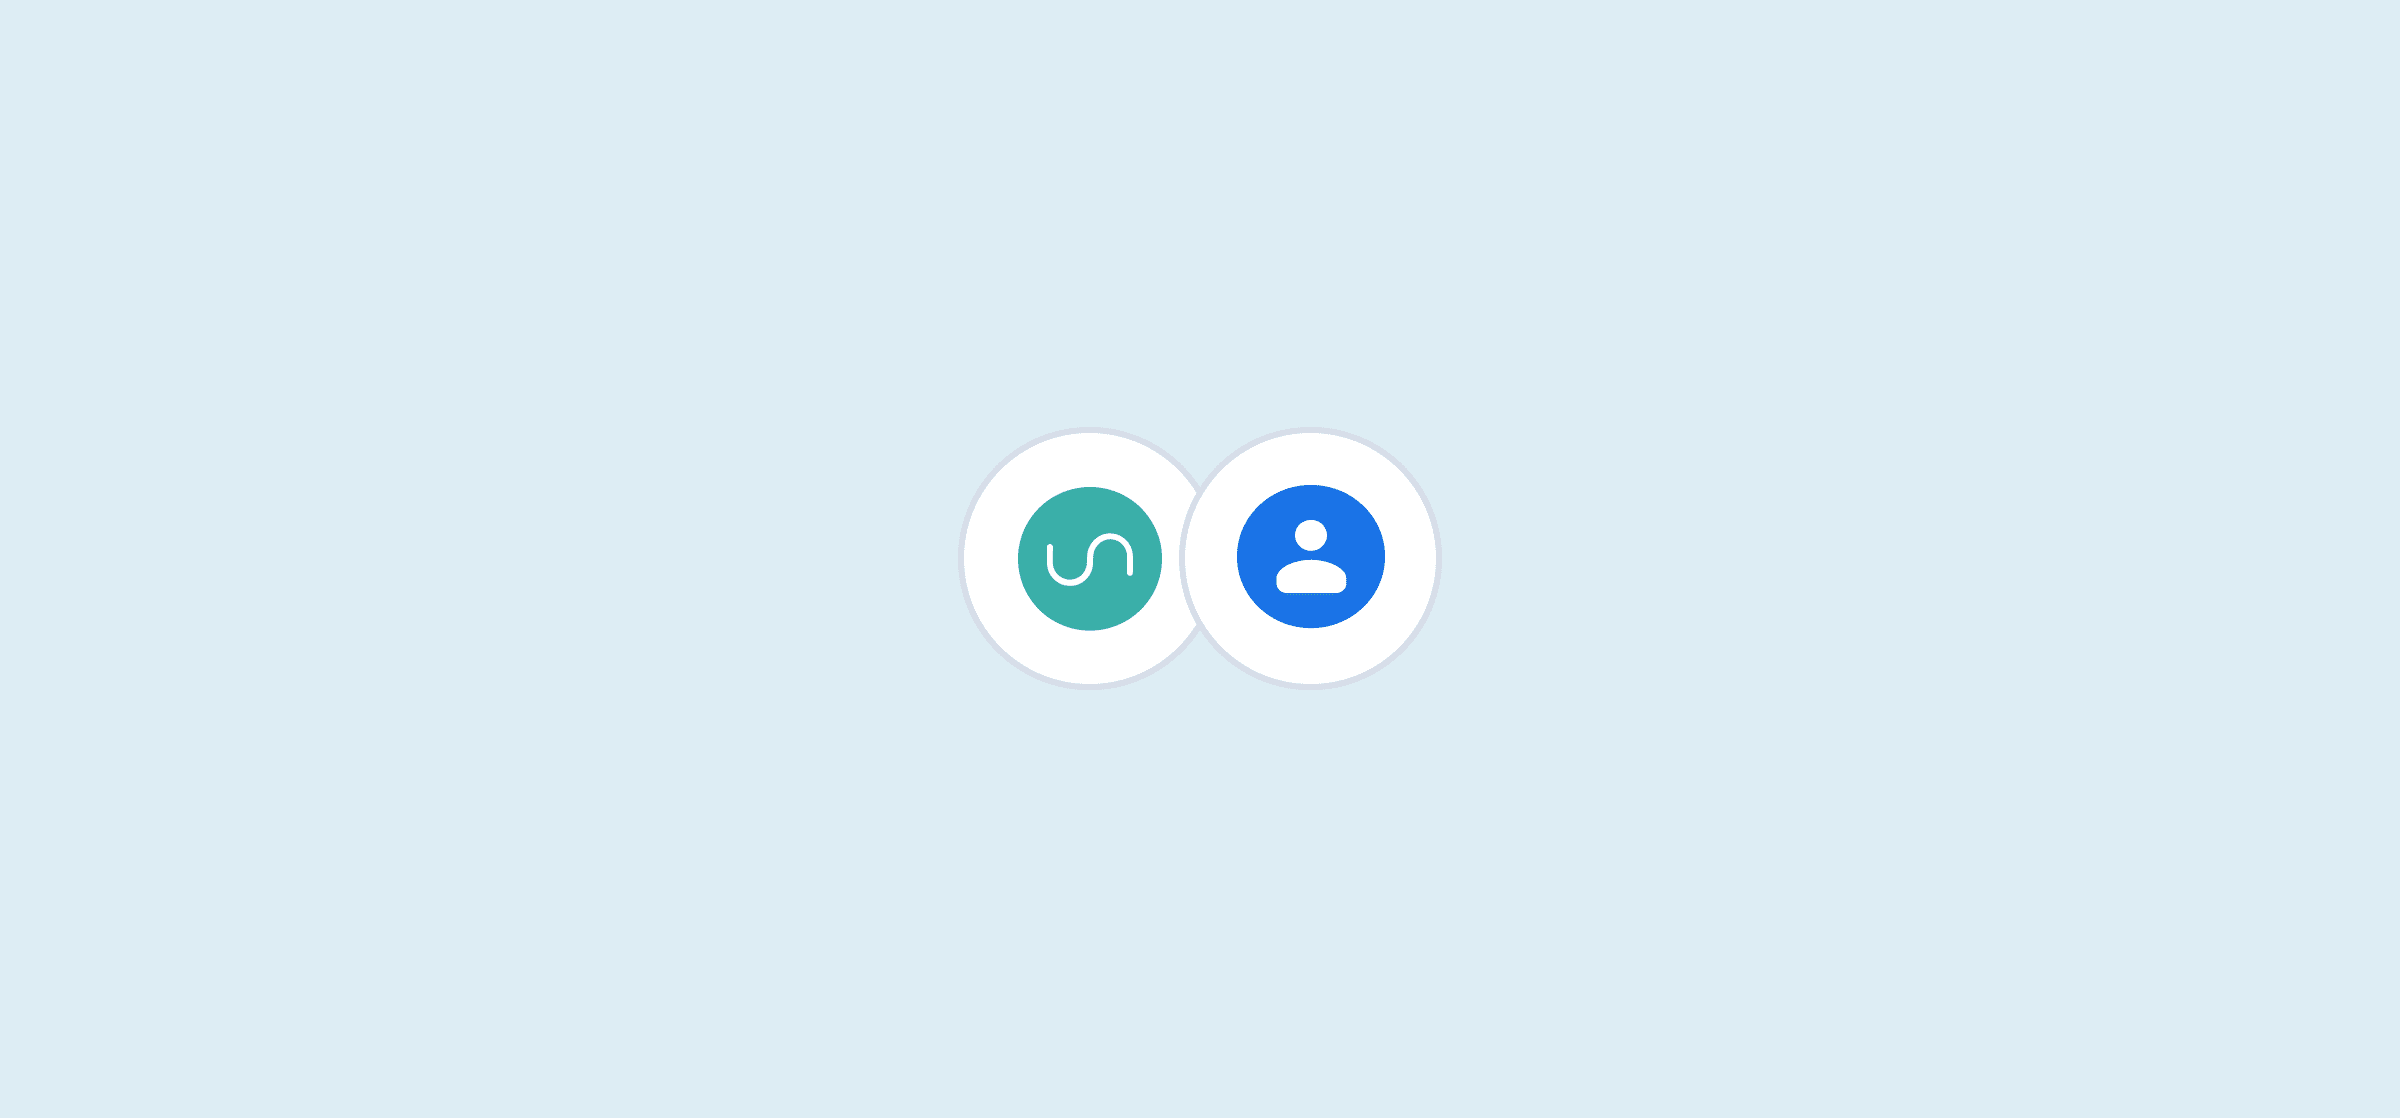 Logos for Unito and Google Contacts, representing Unito's use case for Google Contacts and Notion.